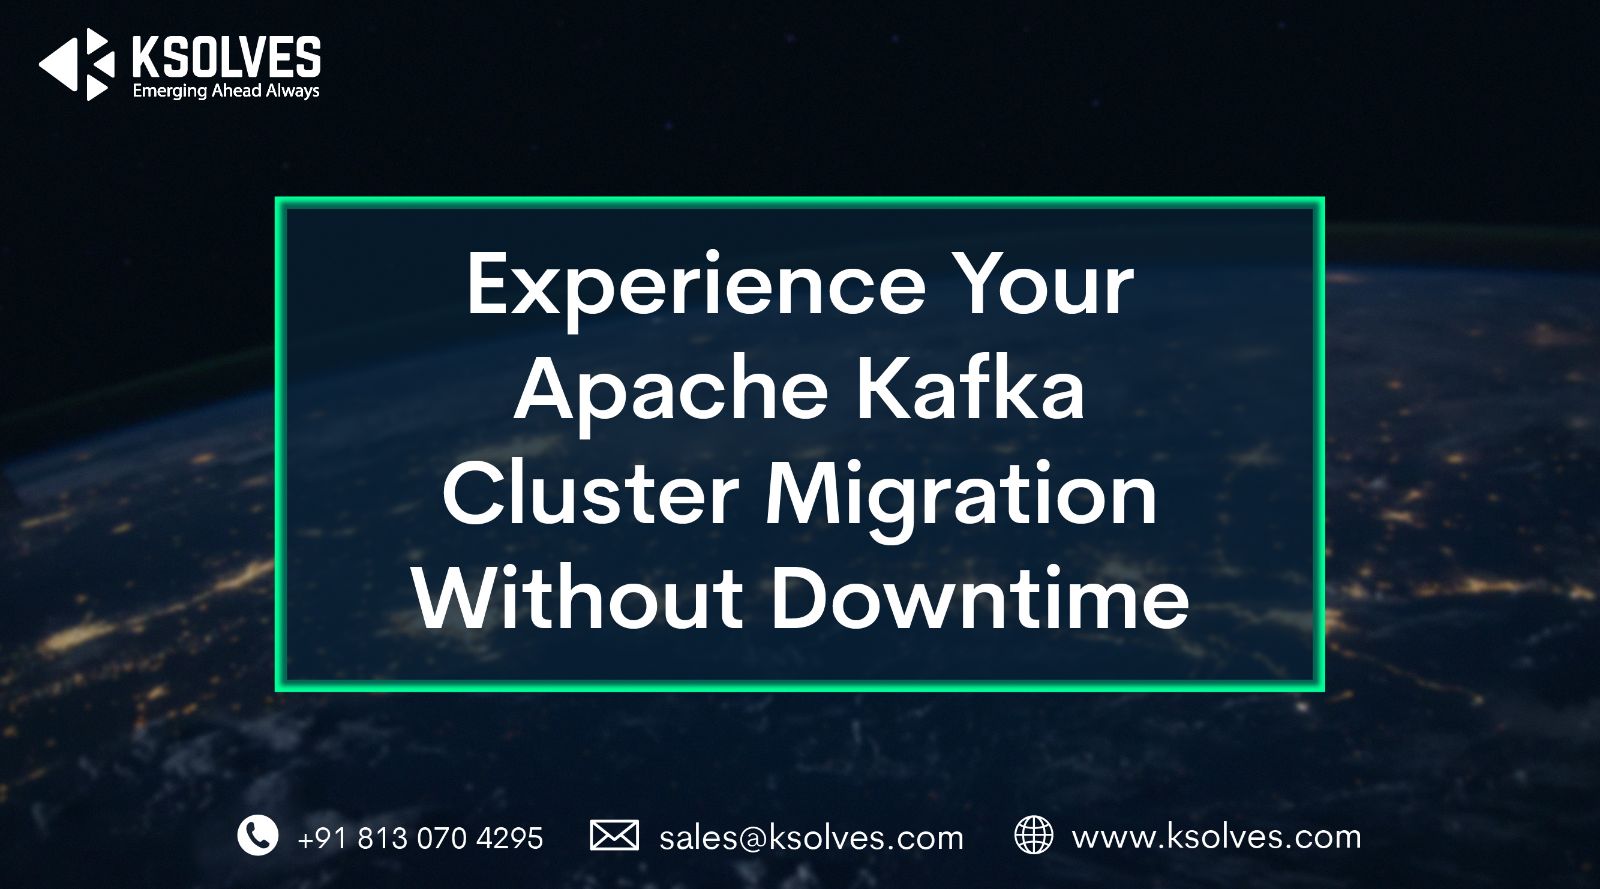 Experience Your Apache Kafka Cluster Migration Without Downtime